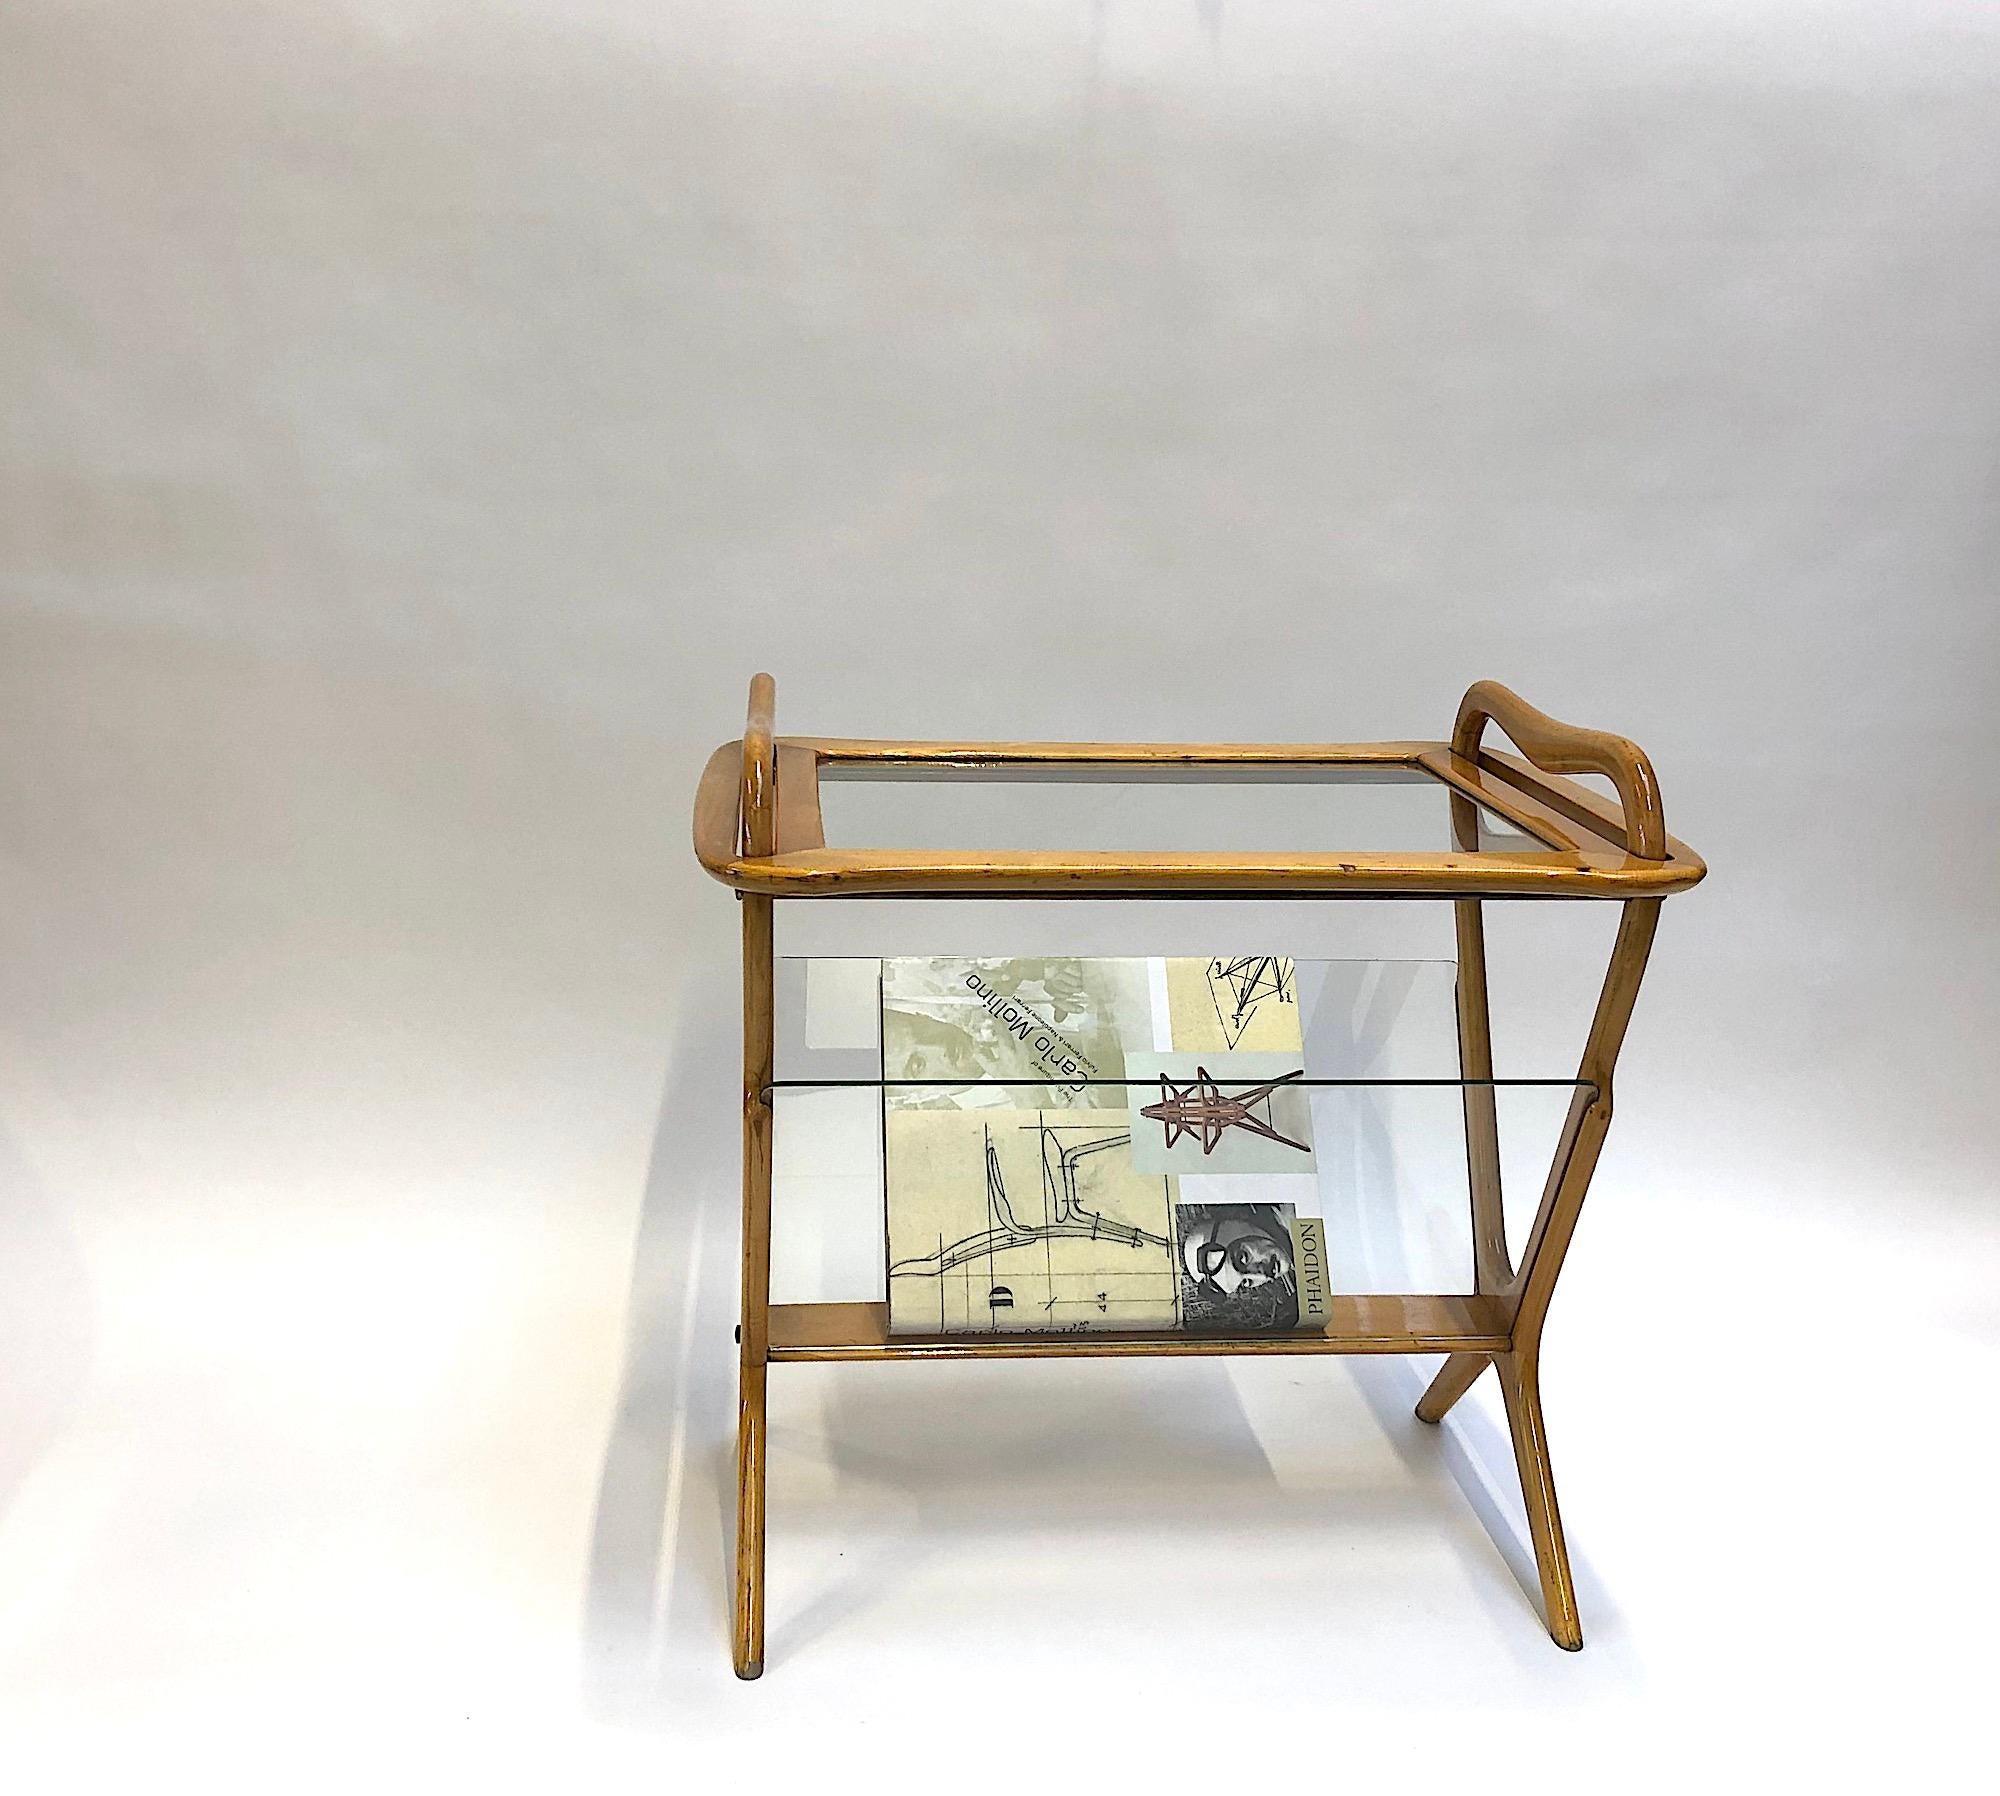 Ico & Luisa Parisi (1916 - 1996)

Very nice side table / magazine rack made out of solid birch wood , glas and brass details. The top is a removable Tray.
Produced by De Baggis in 1956.
Size: H 58 x B 60 x T 46 cm. Used, but good